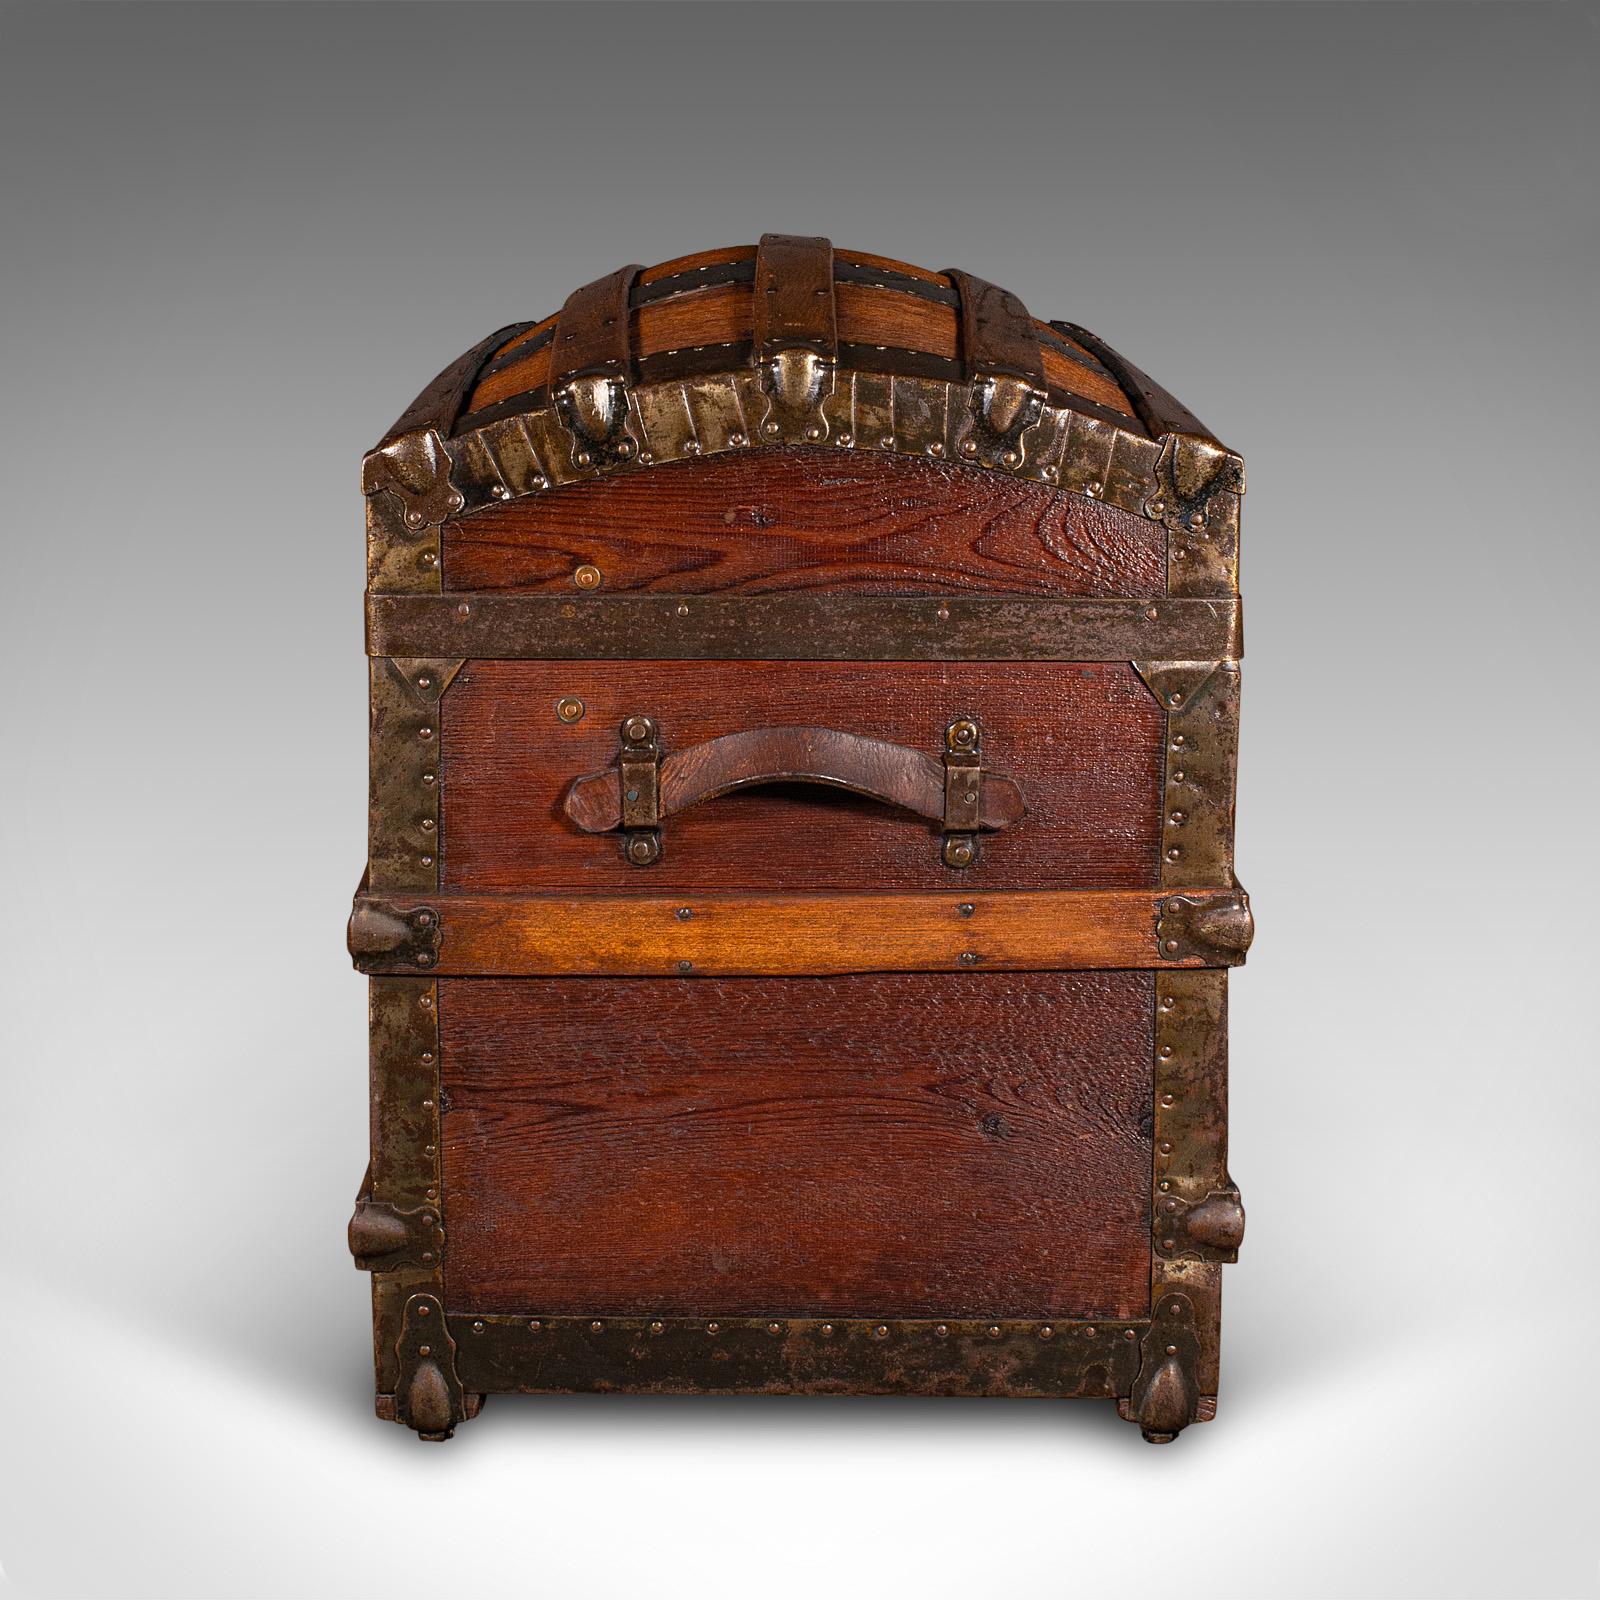 19th Century Antique Dome Topped Chest, English, Pine, Shipping Trunk, Victorian, Circa 1870